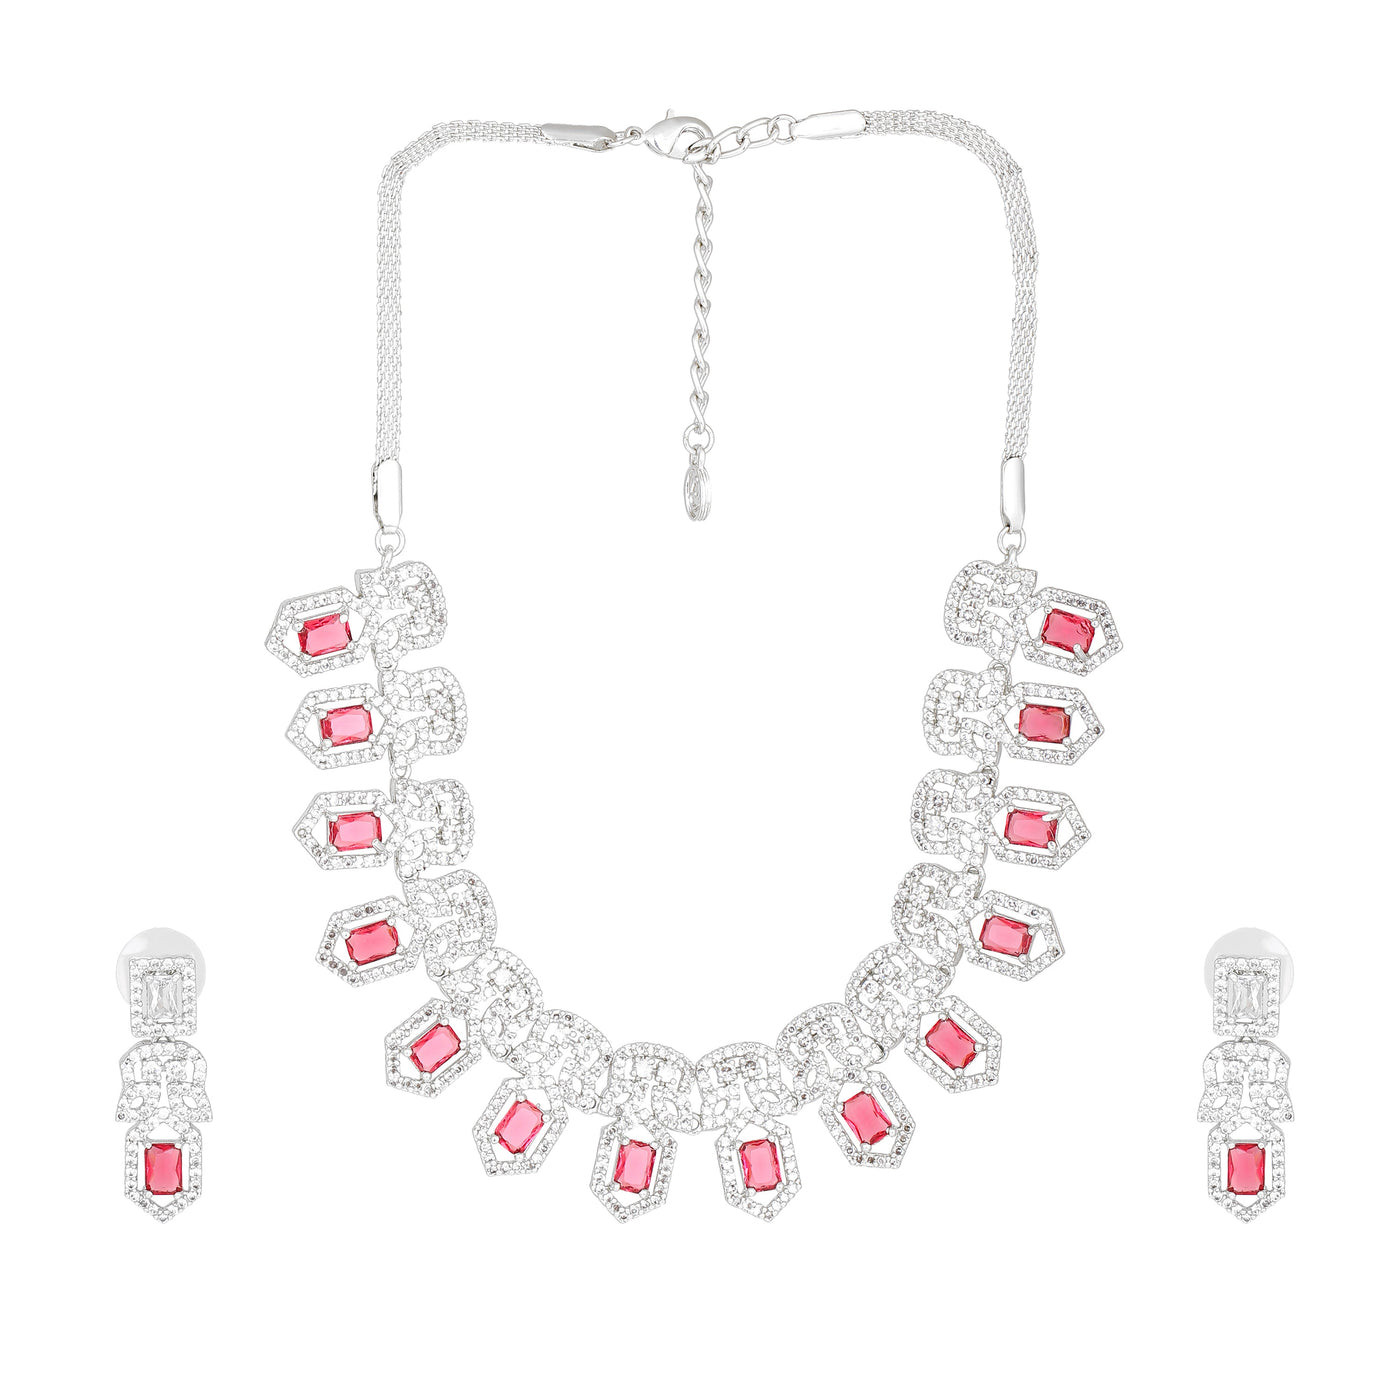 Estele Rhodium Plated CZ Sparkling Necklace Set with Tourmaline Pink Crystals for Women